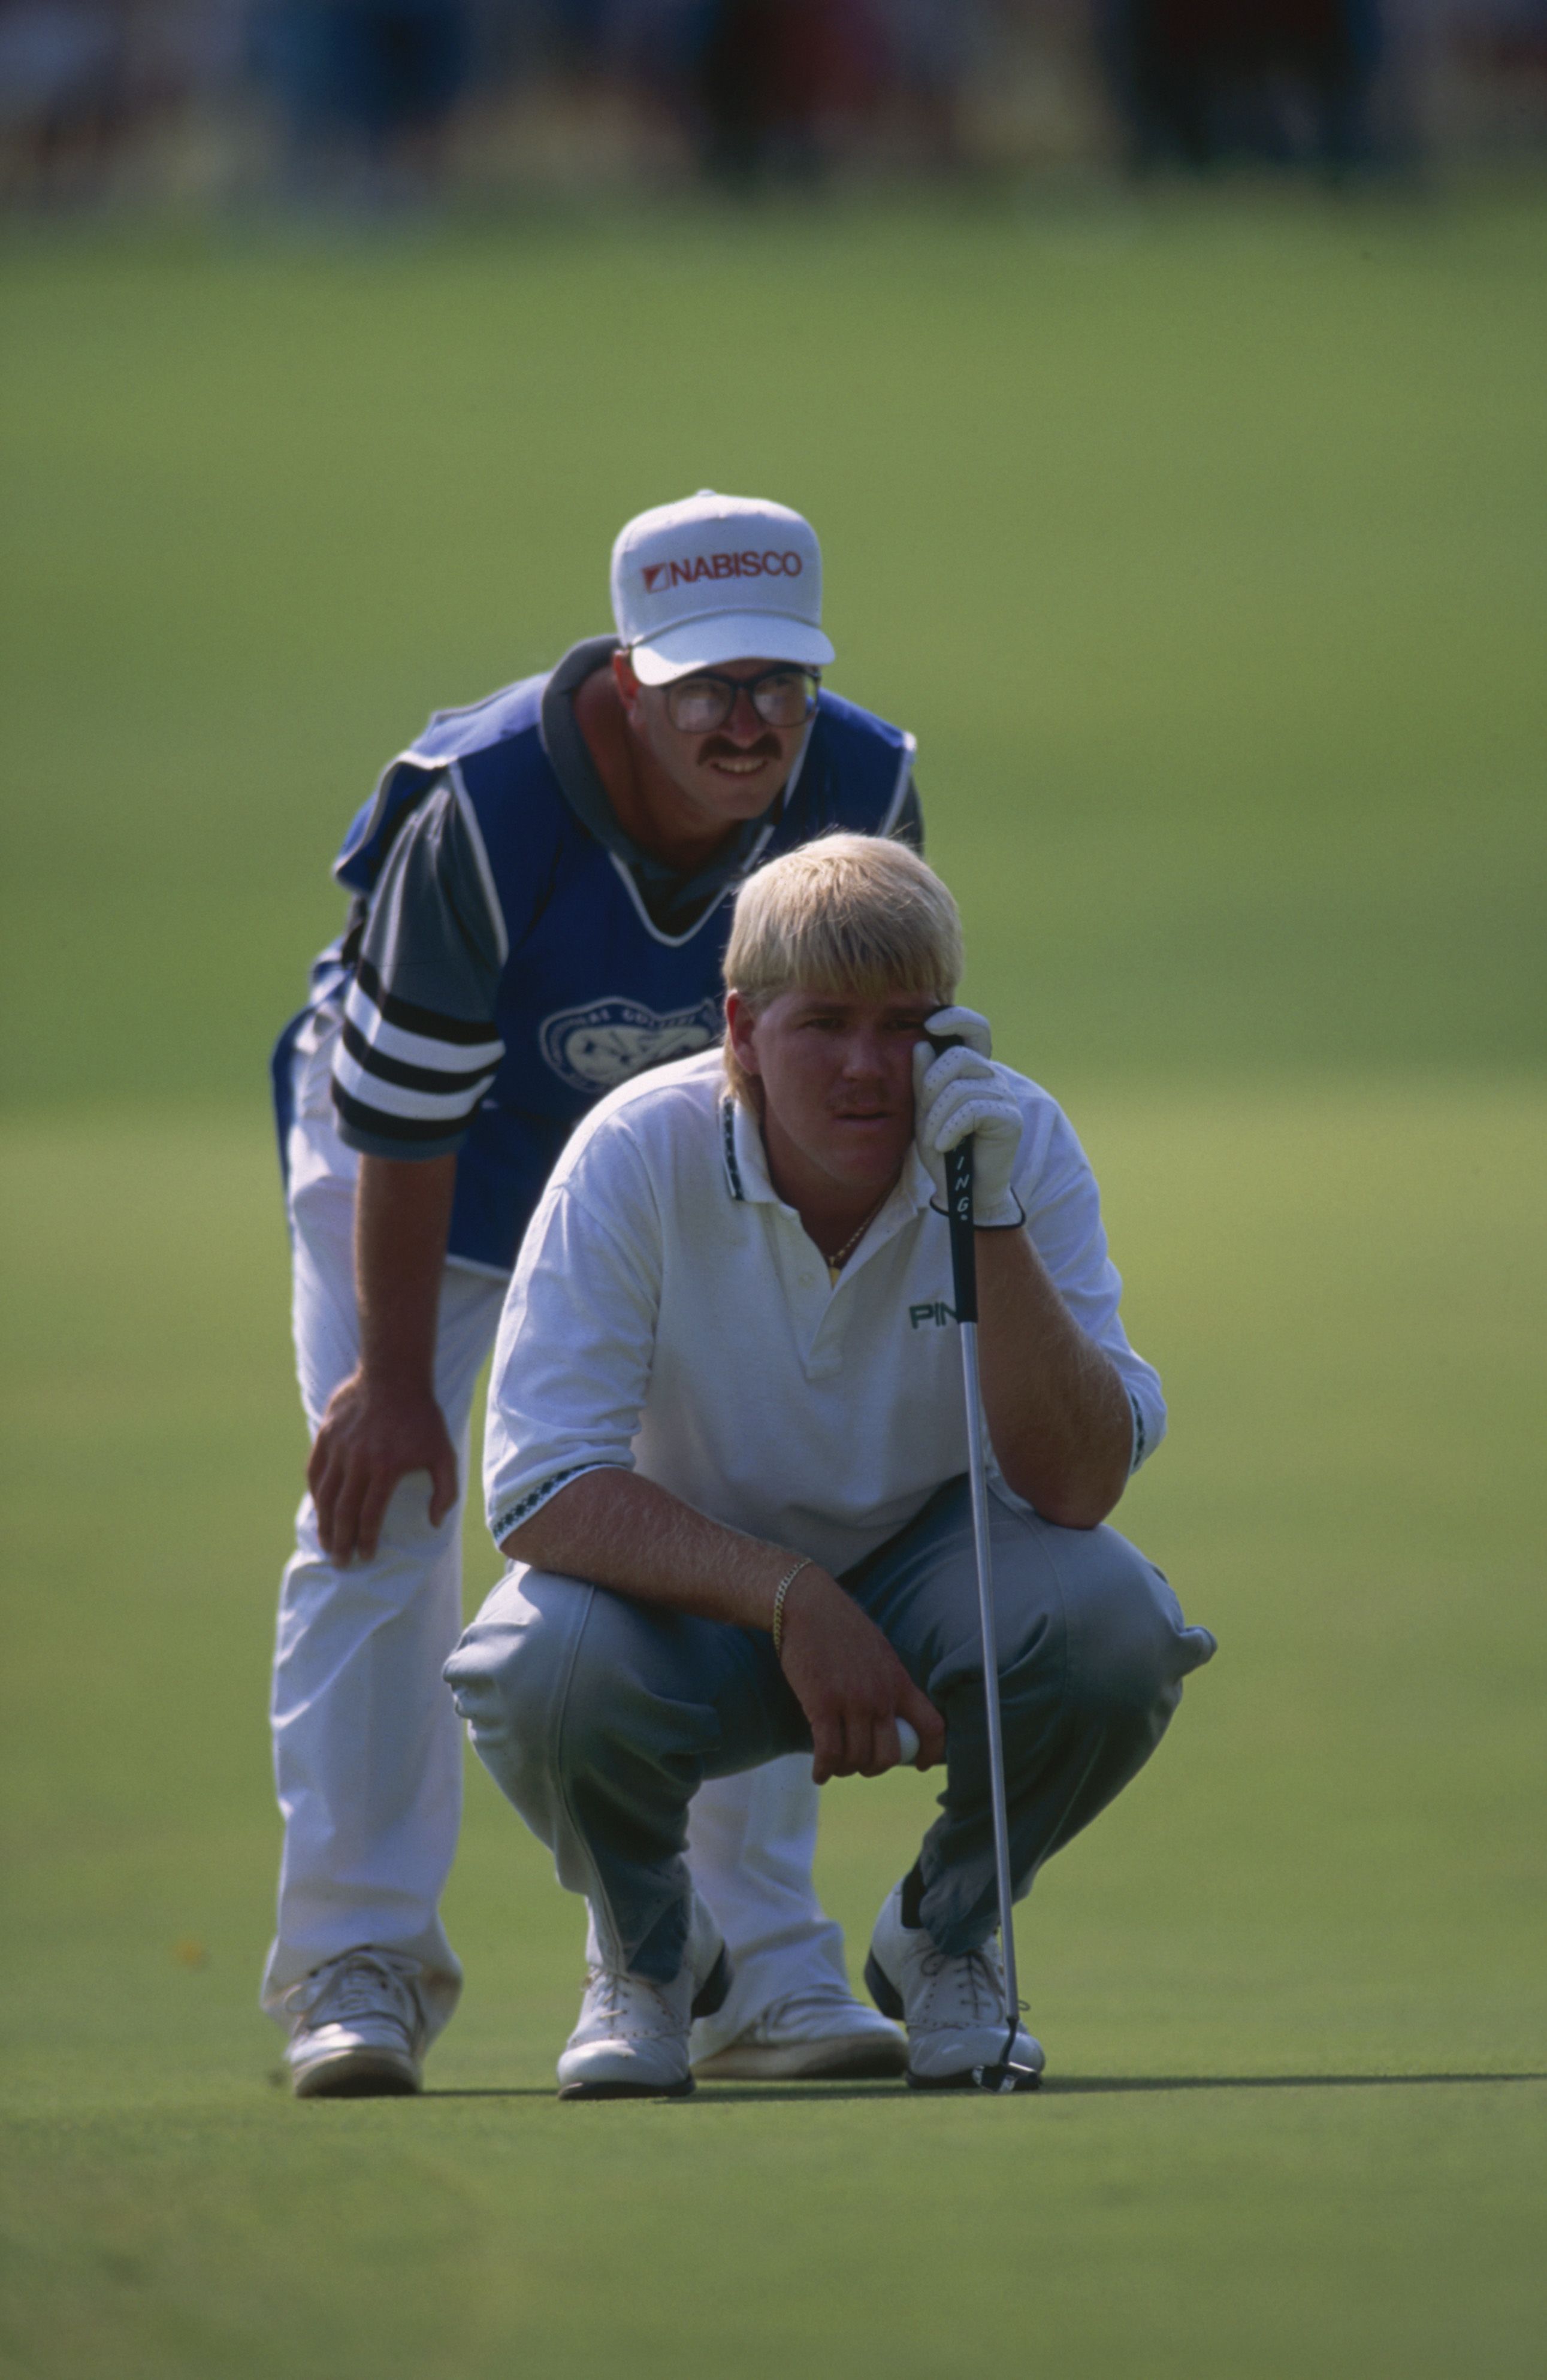 Golf fans react to John Daly's crazy USPGA outfit as 1991 champ